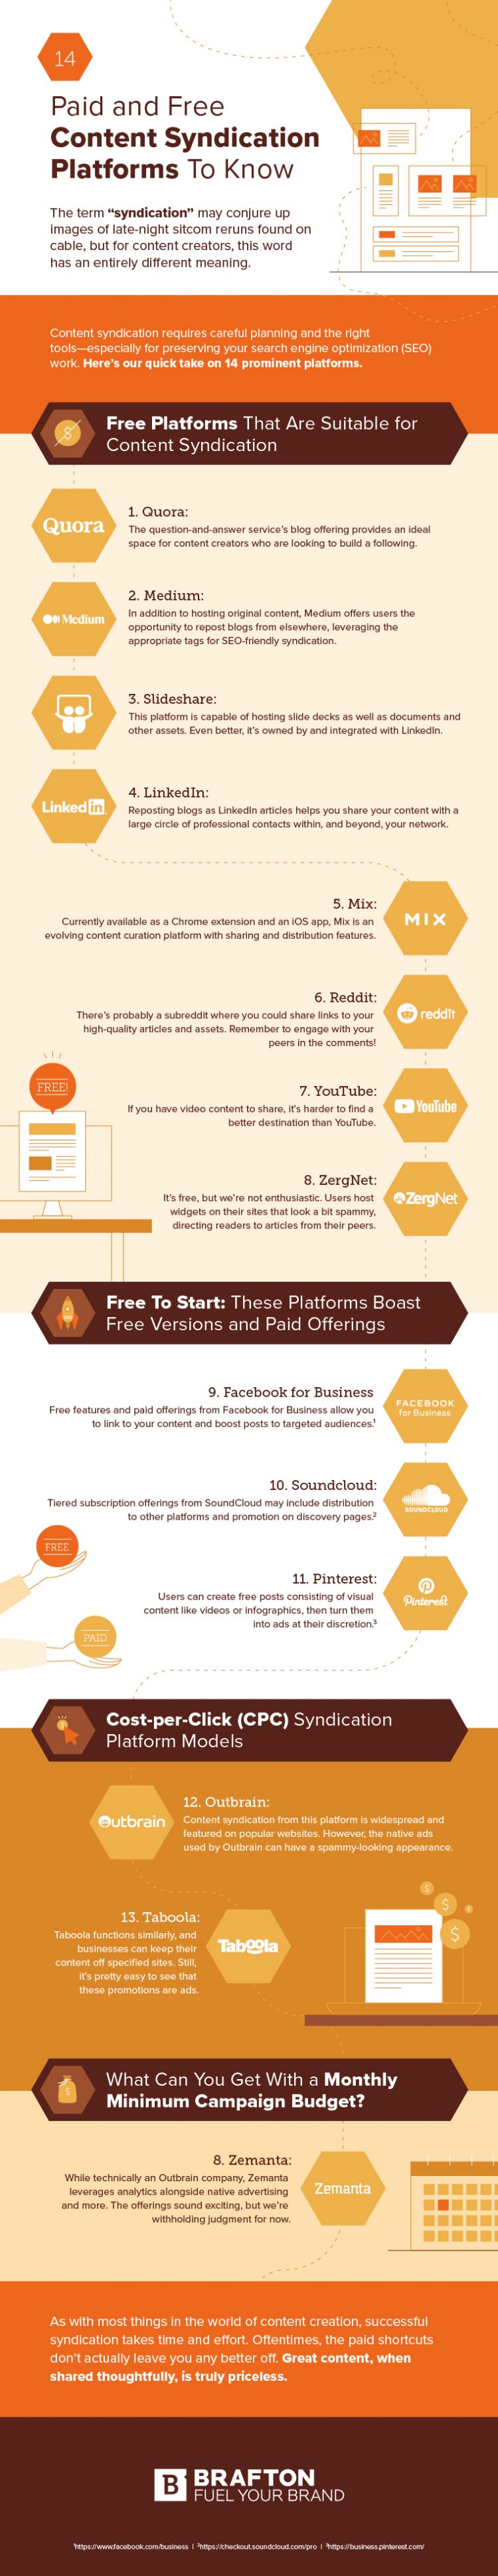 14 content syndication platforms to know